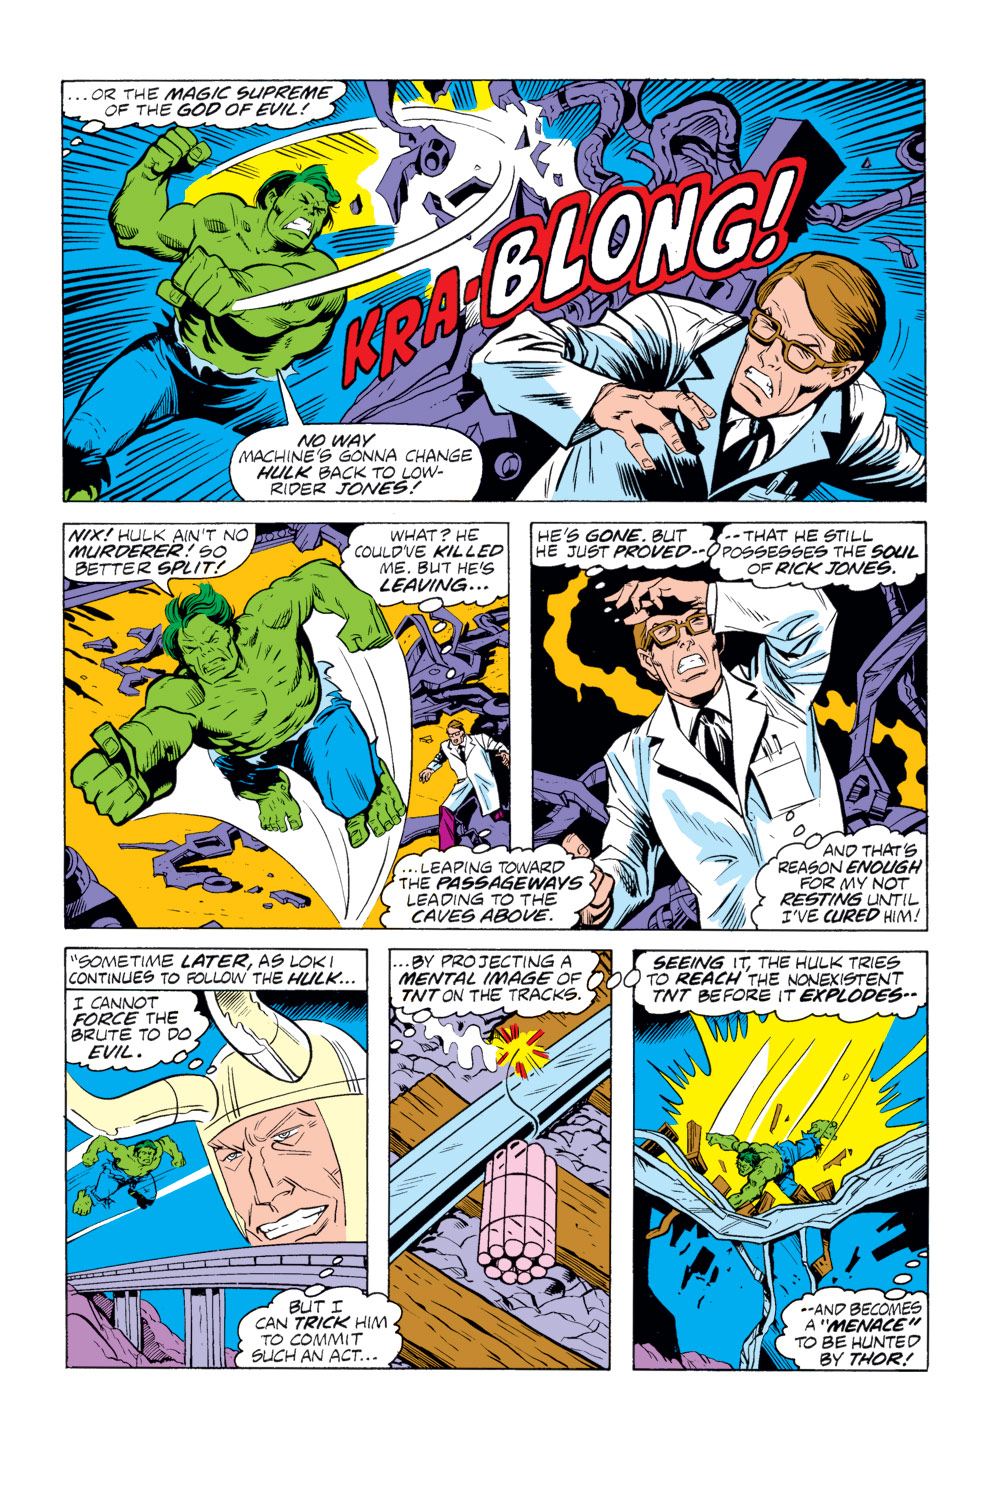 What If? (1977) issue 12 - Rick Jones had become the Hulk - Page 10